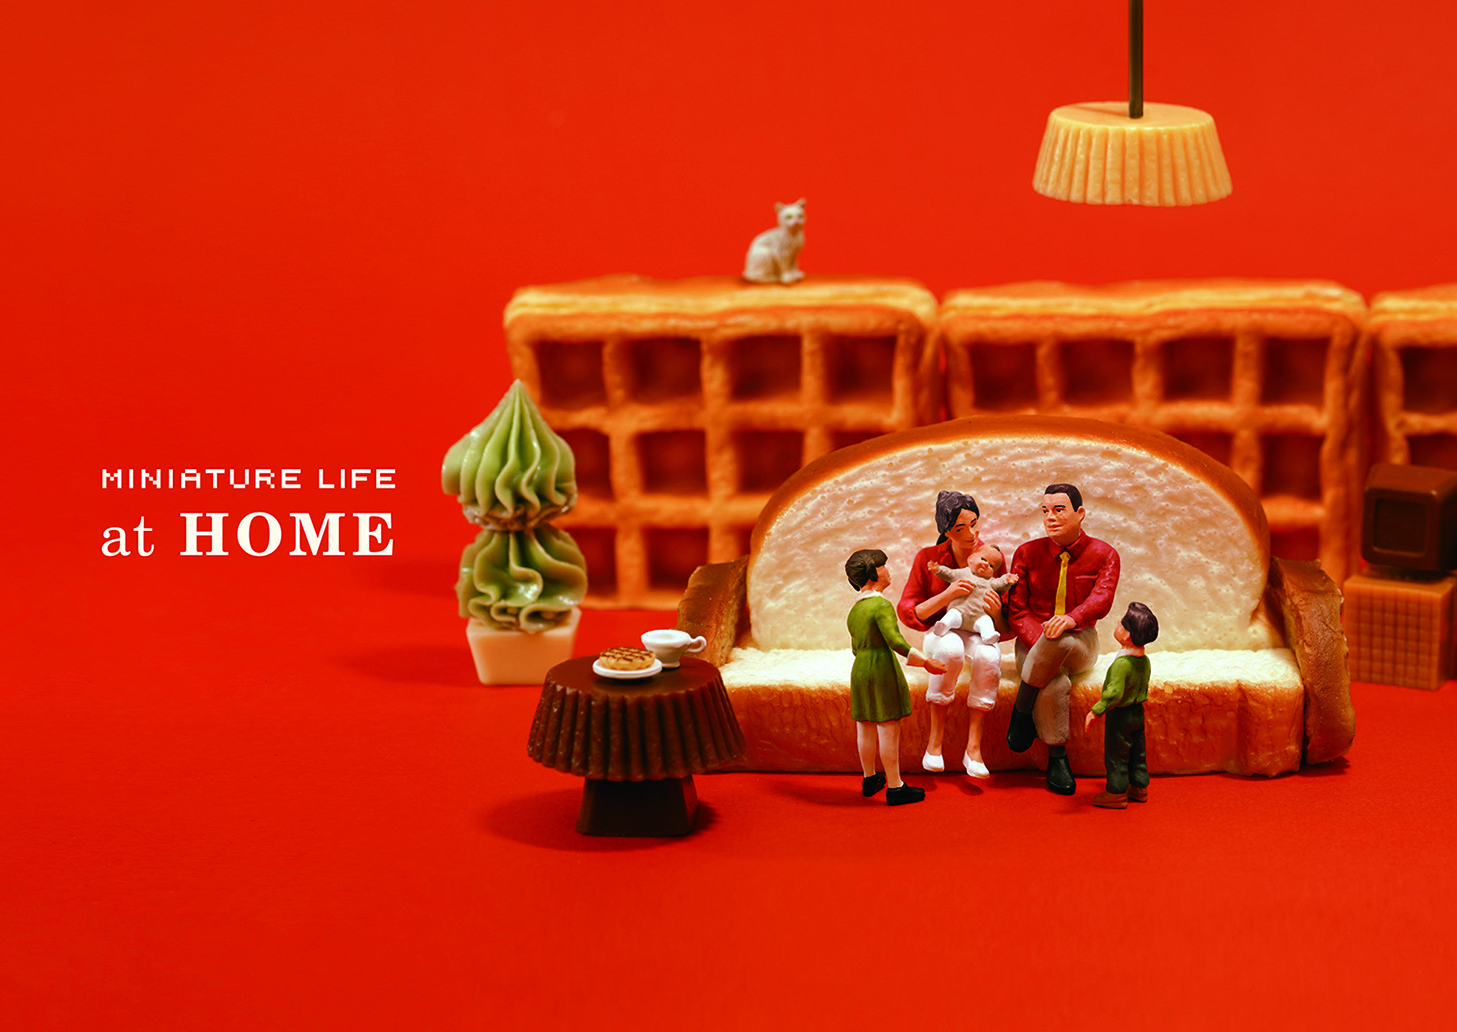 MINIATURE LIFE at HOMEの商品画像